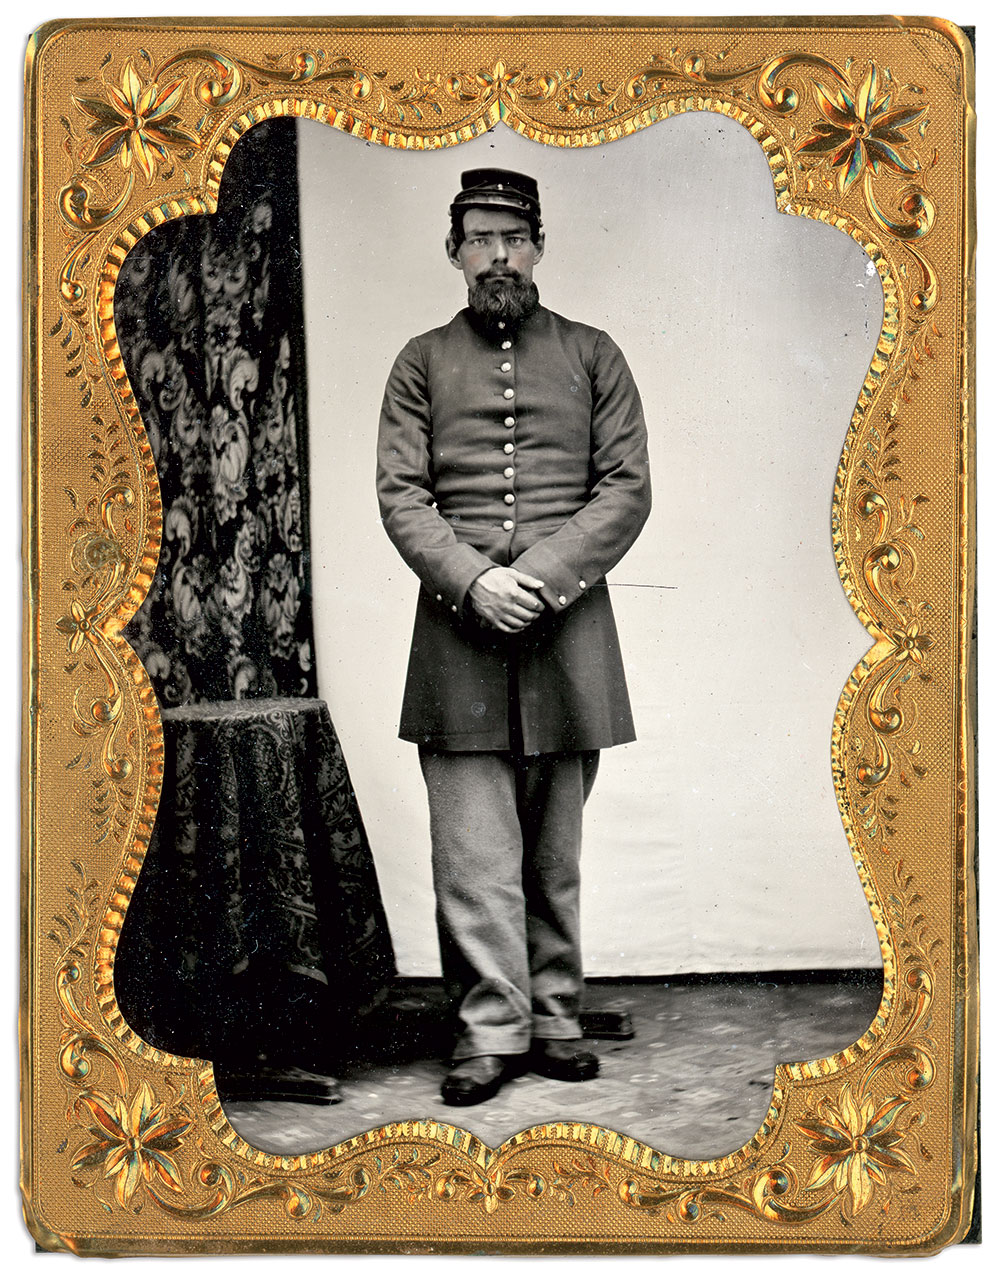 William Marshall. Quarter-plate tintype by an unidentified photographer.